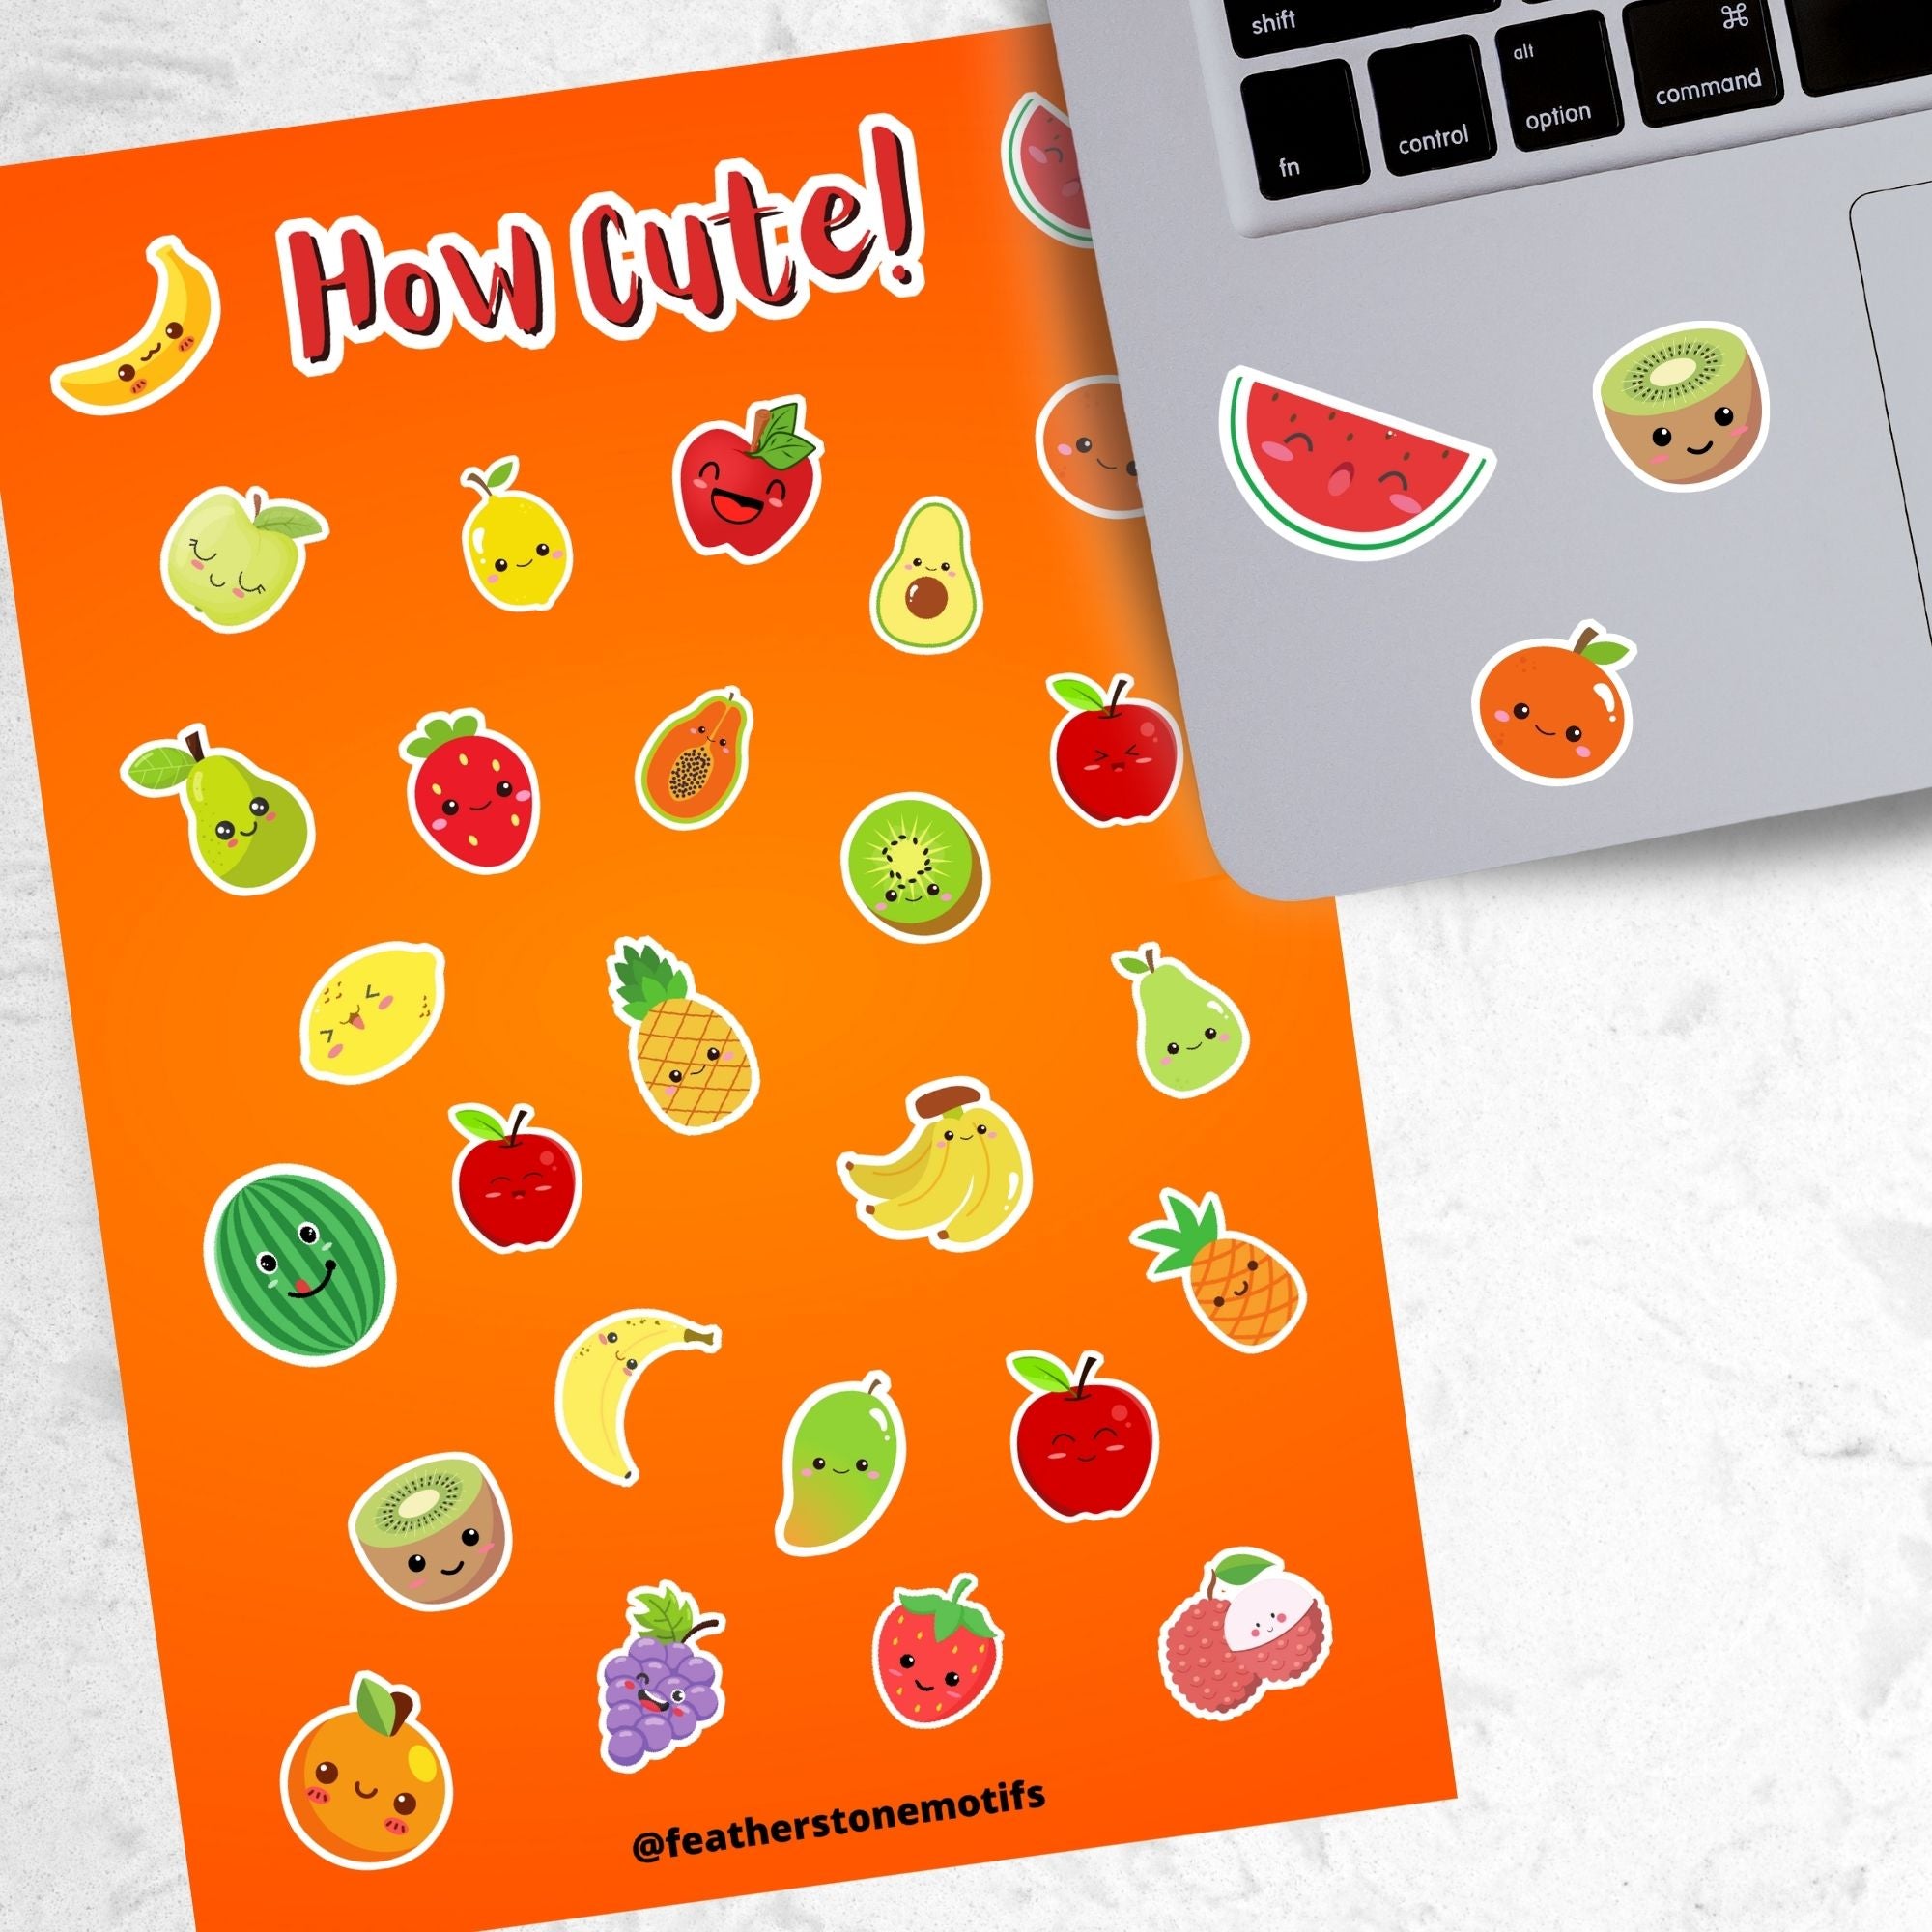 Filled with sticker images of cute fruit, this sticker sheet is sure to put a smile on anyone's face! This image shows the sticker sheet next to an open laptop with stickers of a watermelon slice, a kiwi, and an orange applied below the keyboard.